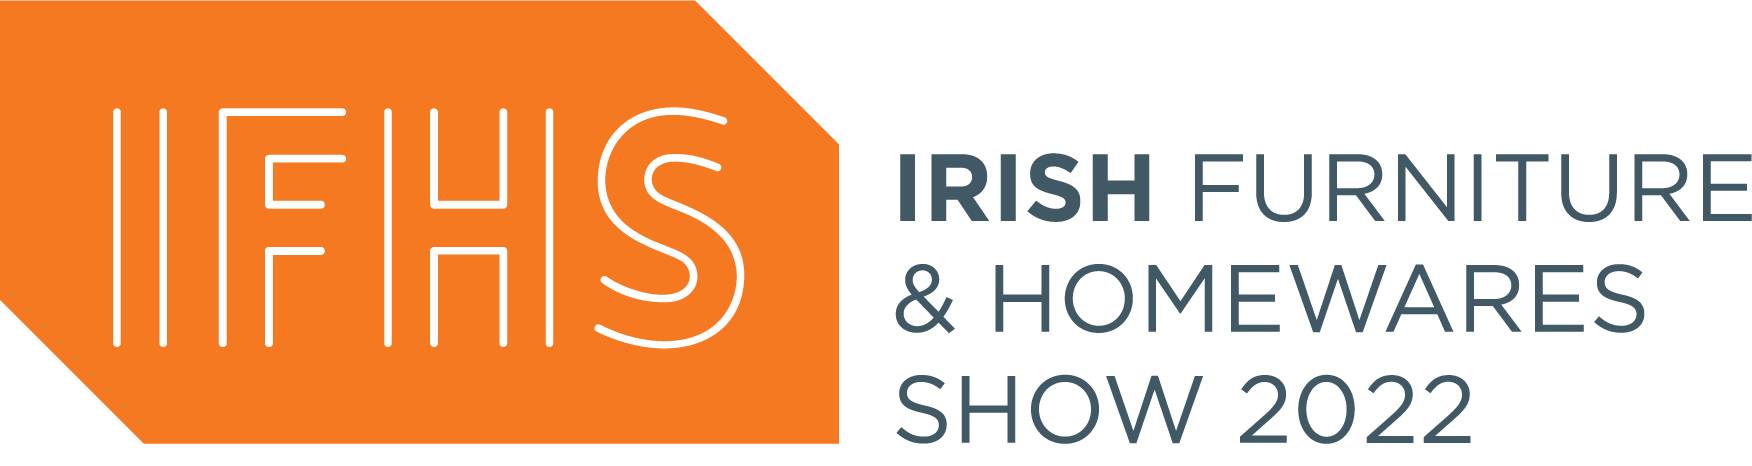 Take a Tour of Annaghmore's New Warehouse - IFHS Tradeshow